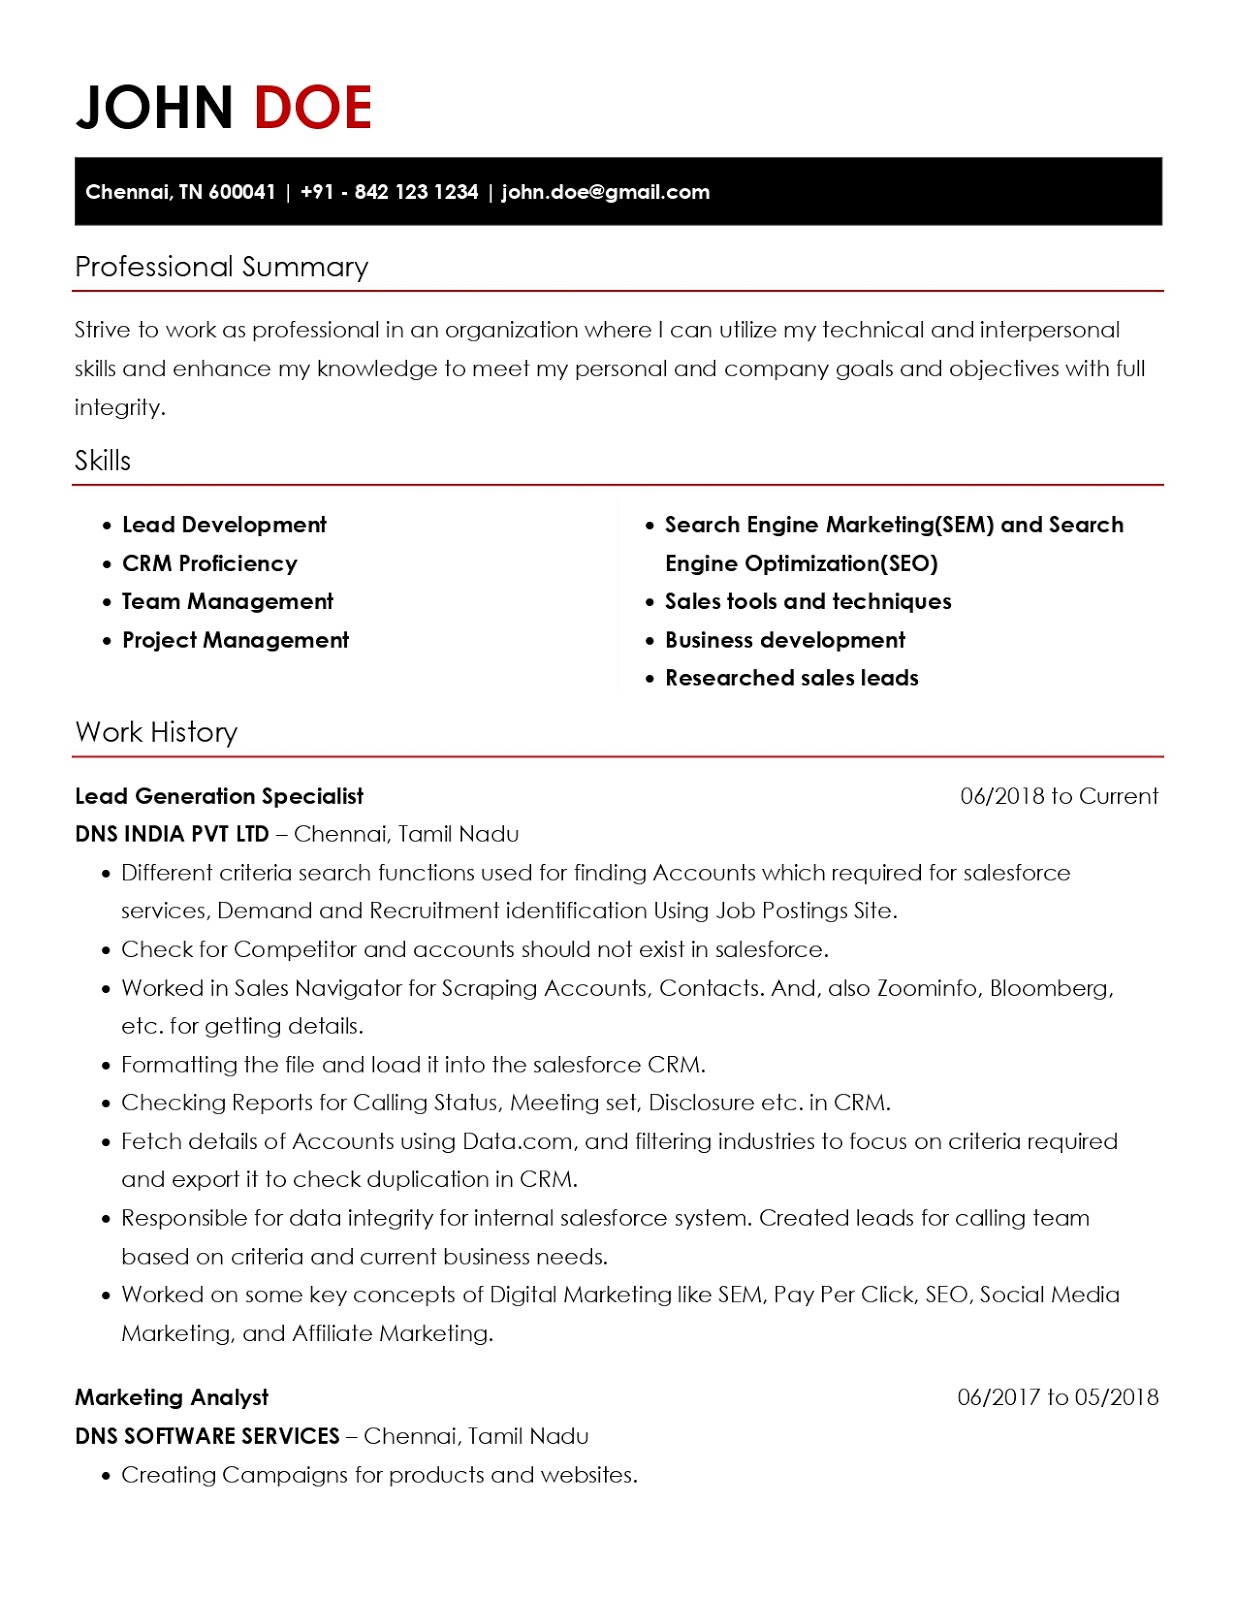 Free Resume Templates Word For Experienced Professionals